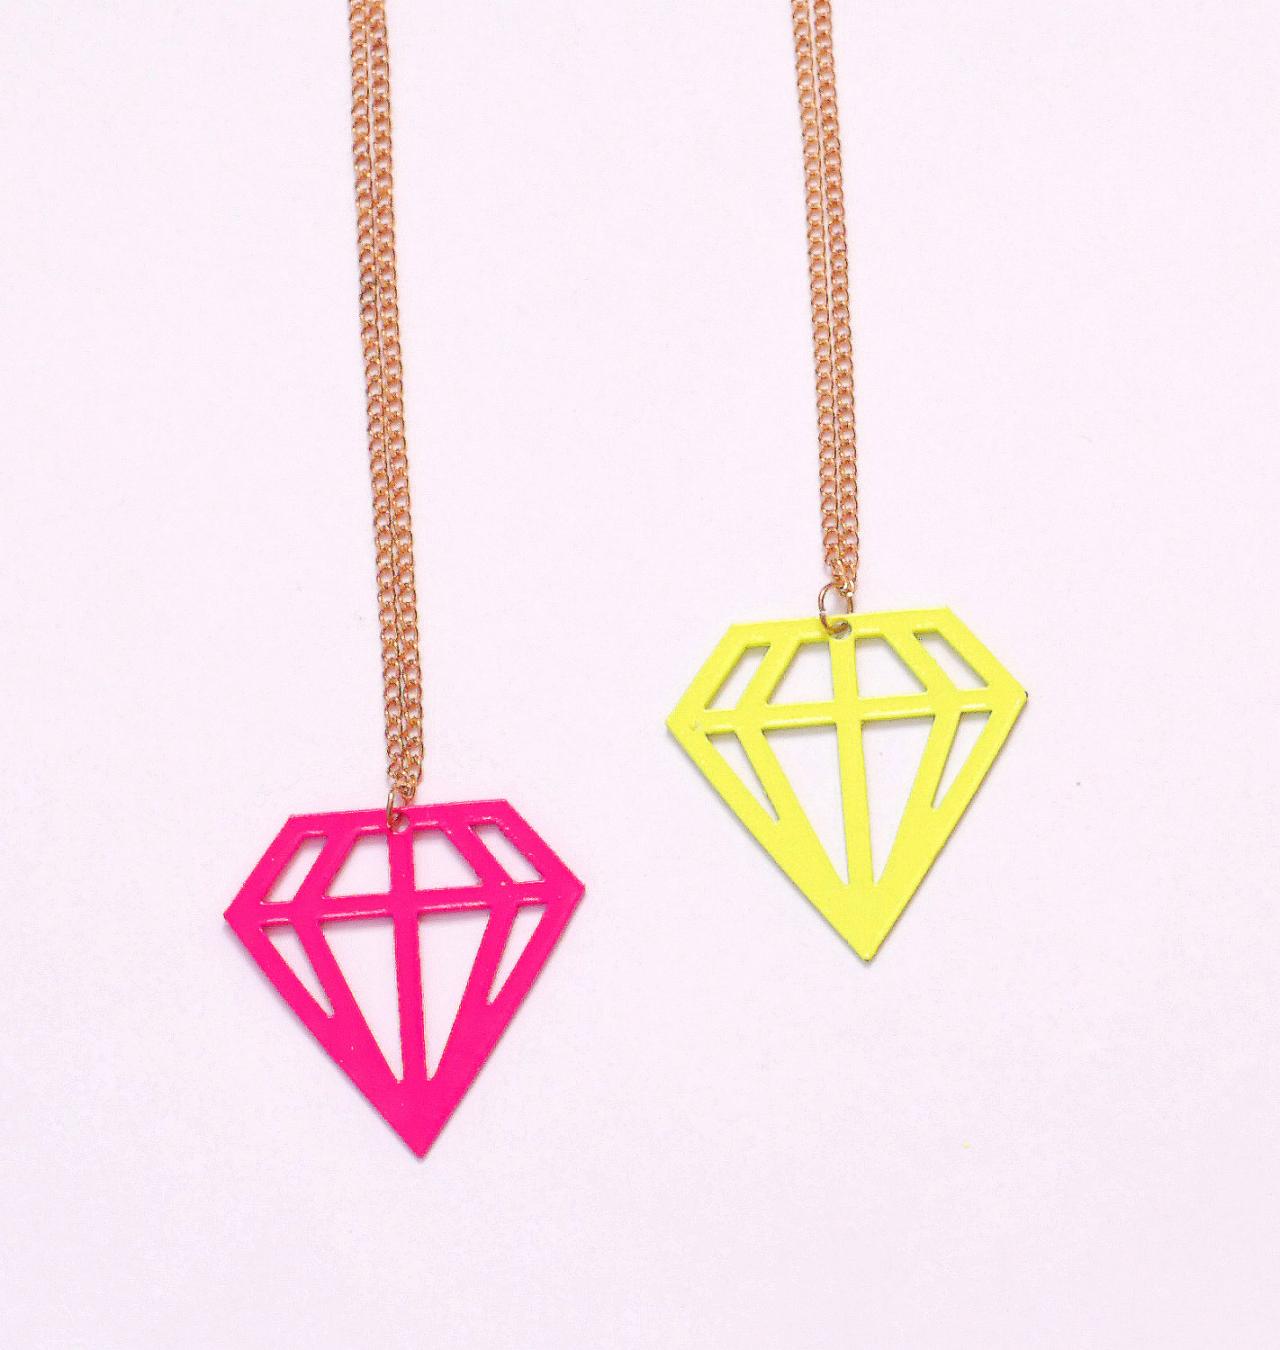 Sweet Long Neon Diamond Shaped Charm Necklaces (pink And Yellow)